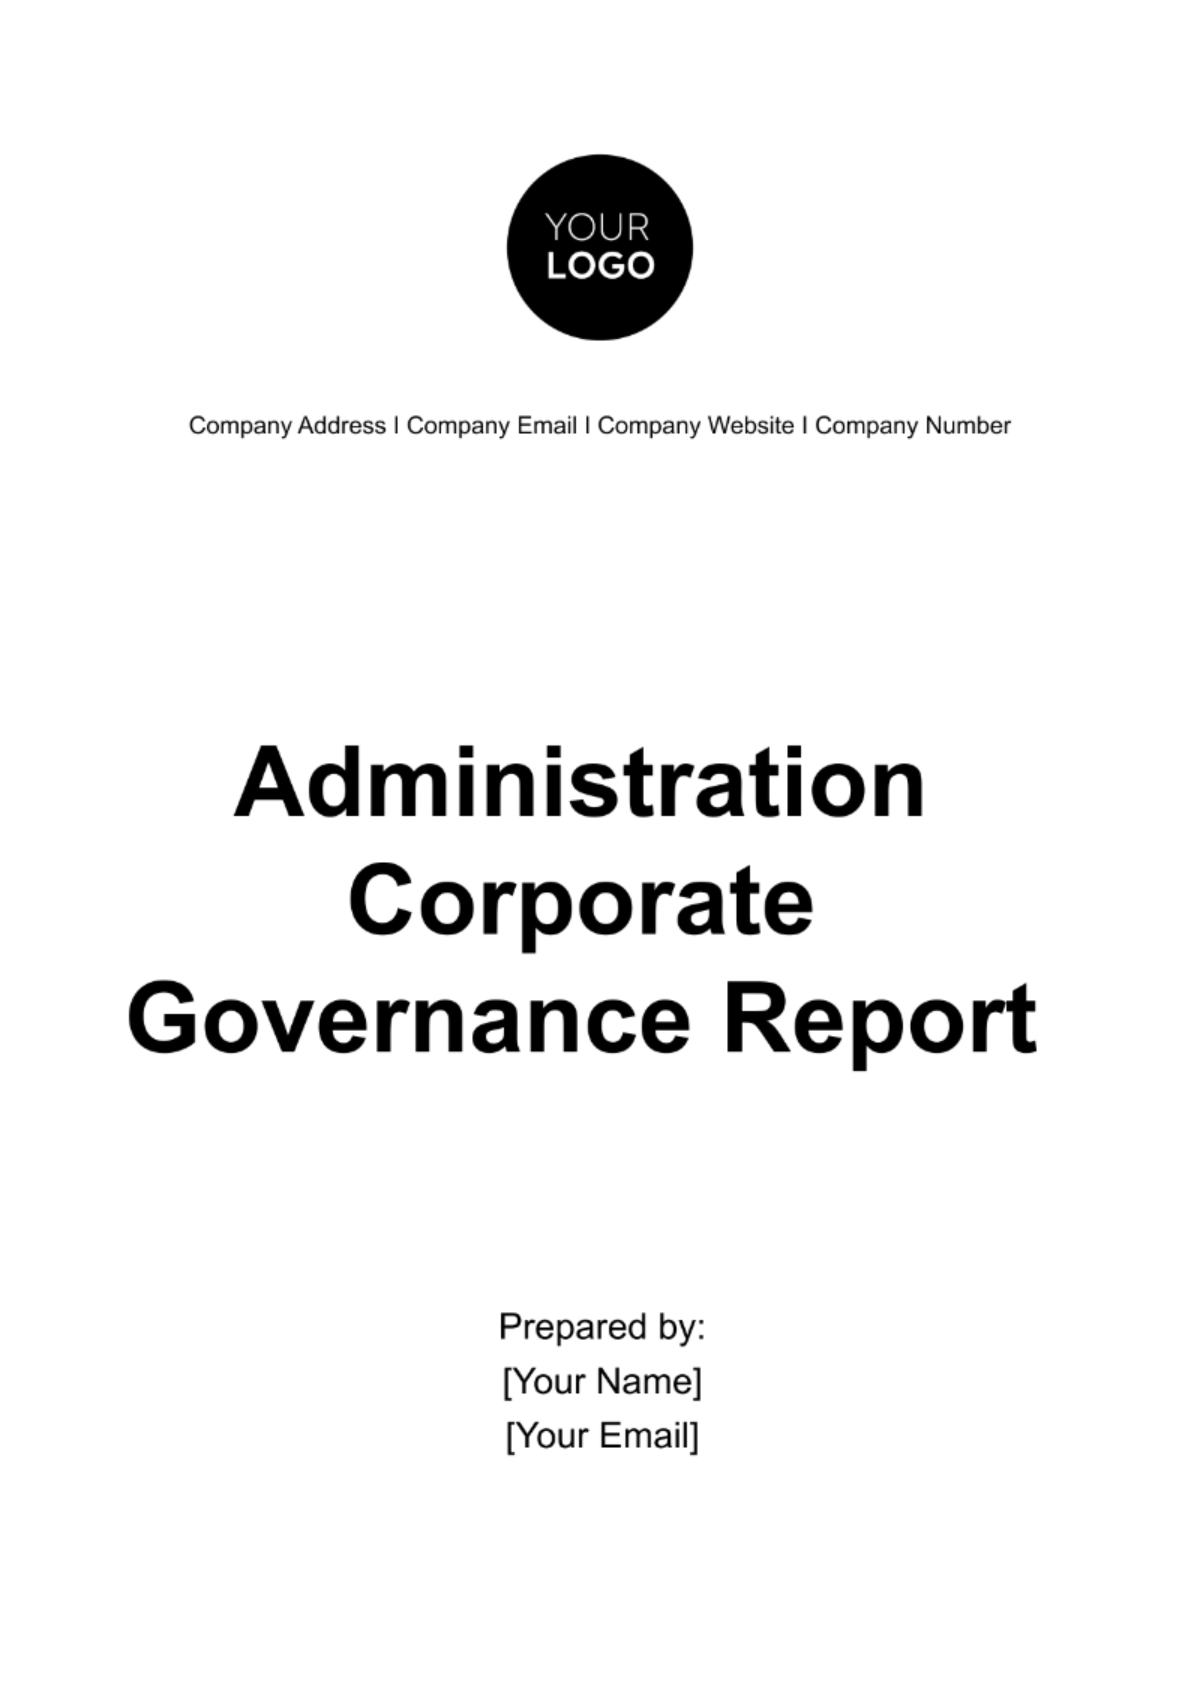 Administration Corporate Governance Report Template